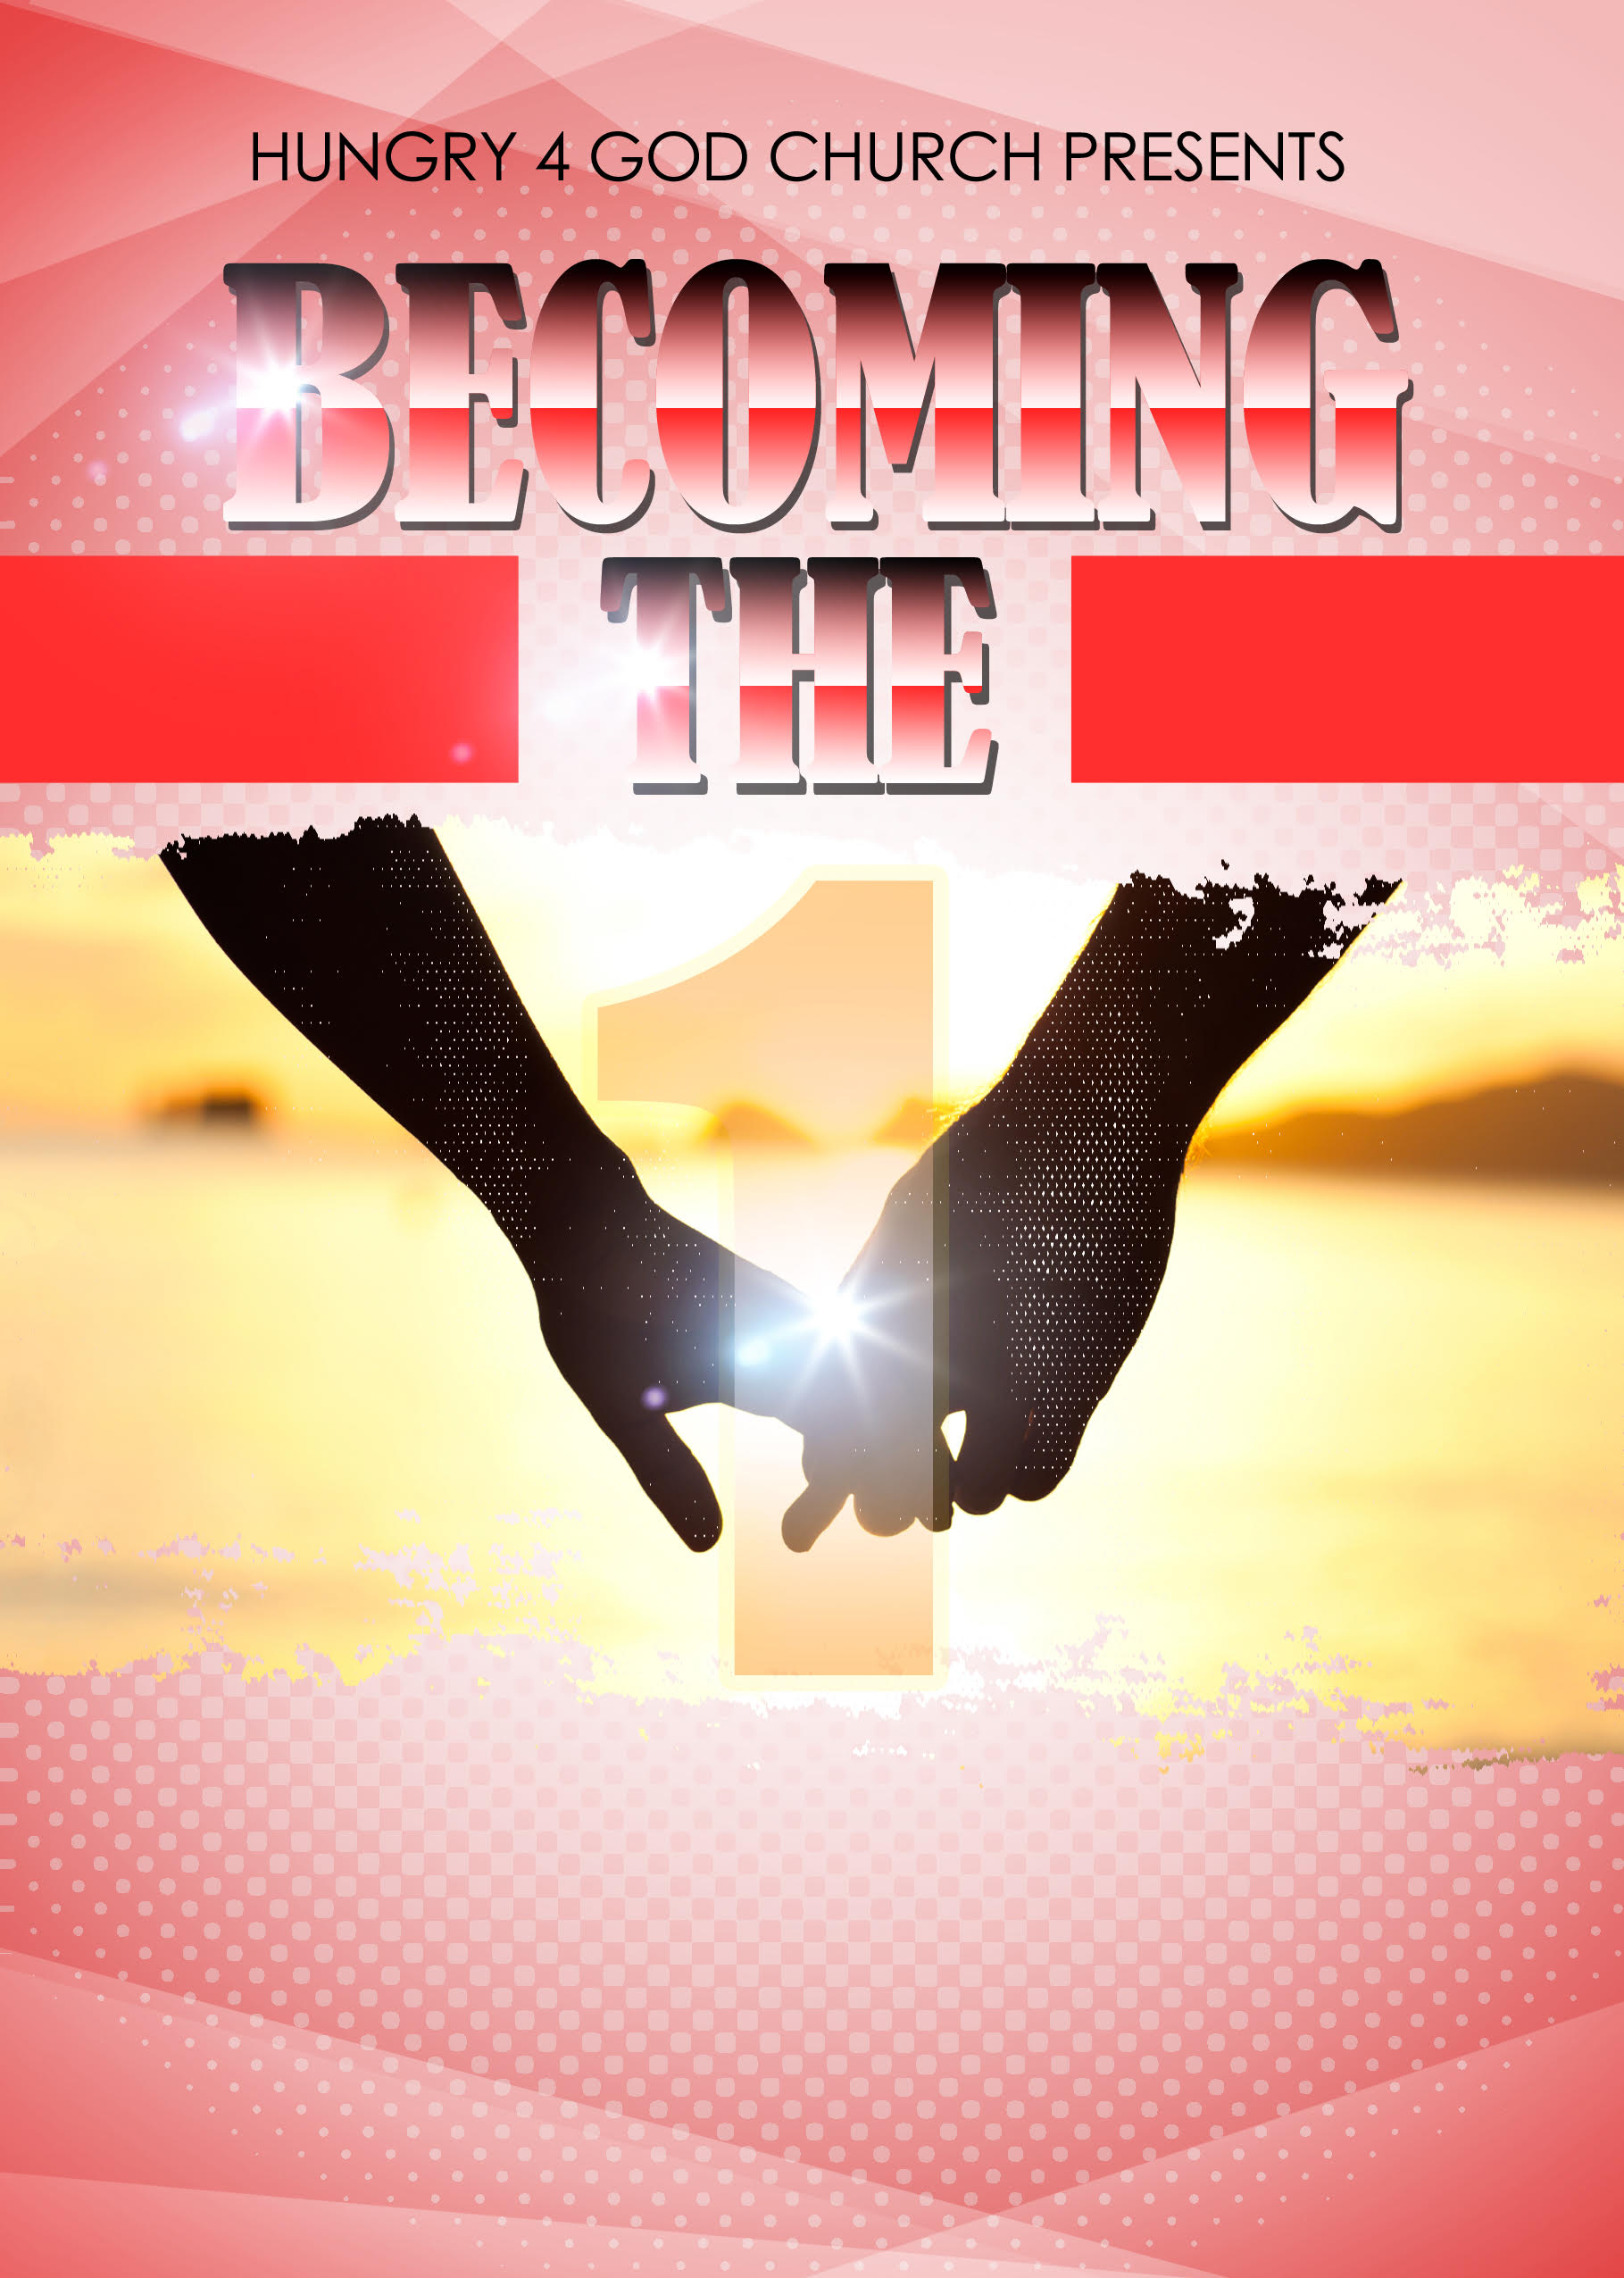 Becoming The 1: The Friendship Foundation